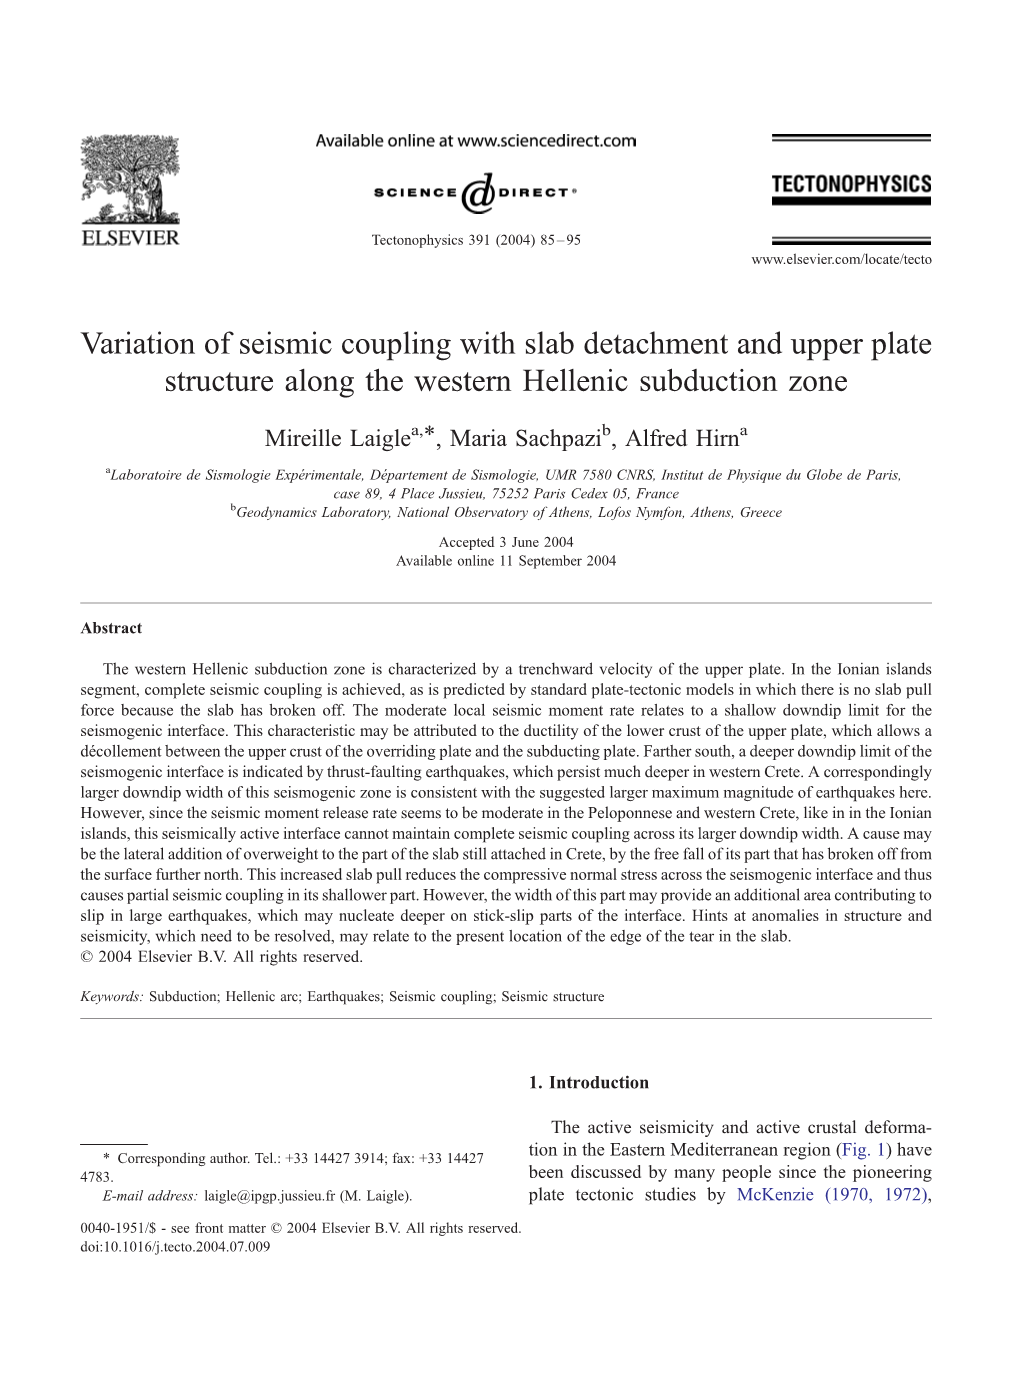 Variation of Seismic Coupling with Slab Detachment and Upper Plate Structure Along the Western Hellenic Subduction Zone